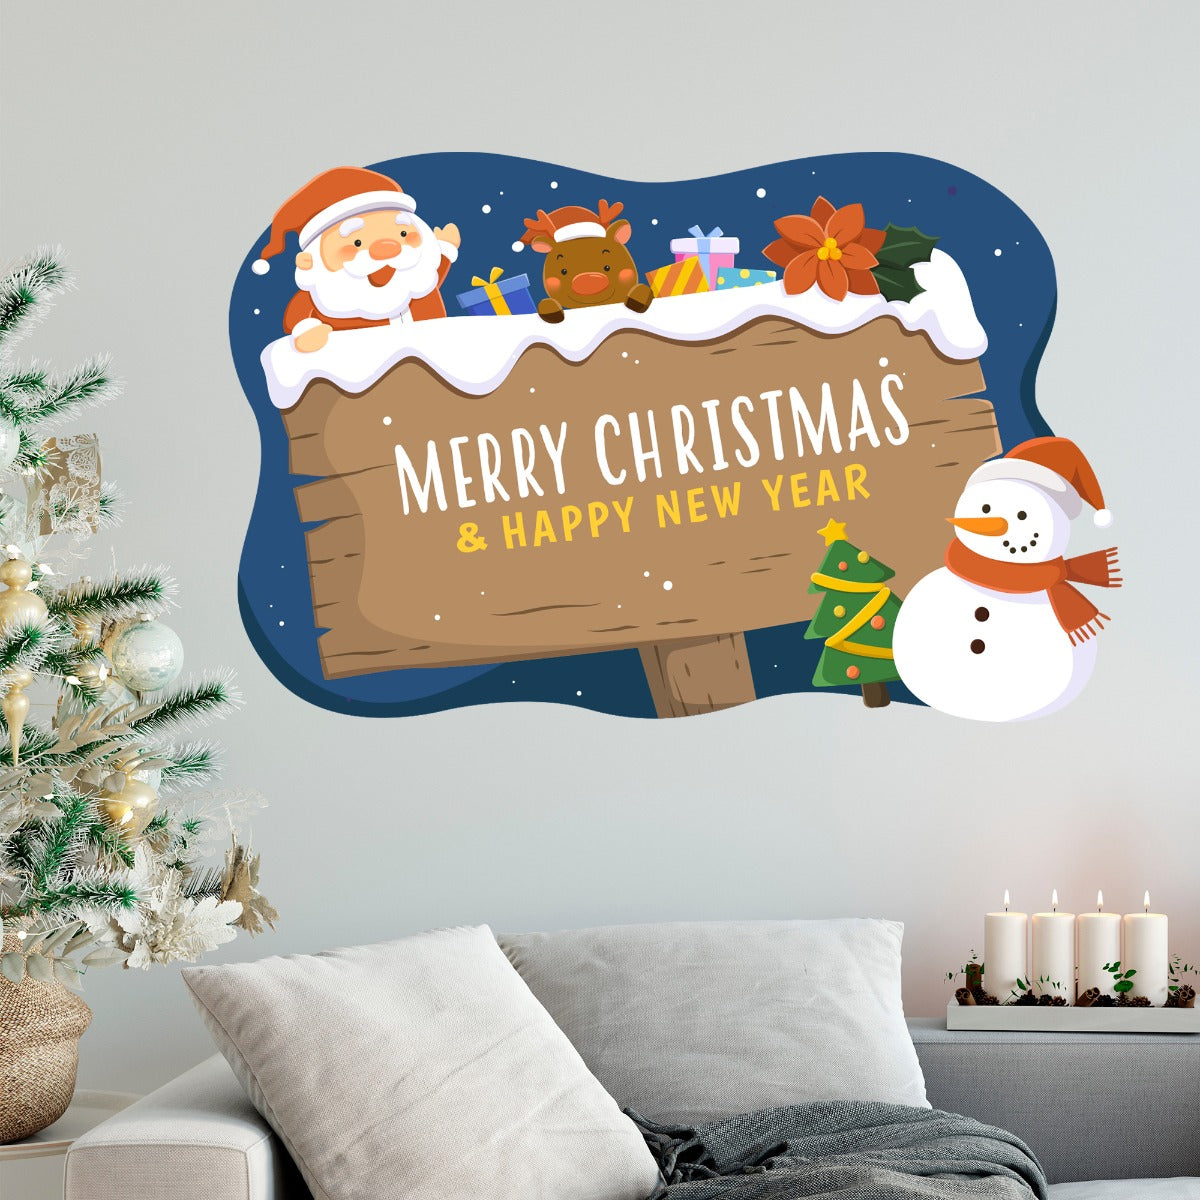 Night Time Merry Christmas Wooden Sign Wall Decal